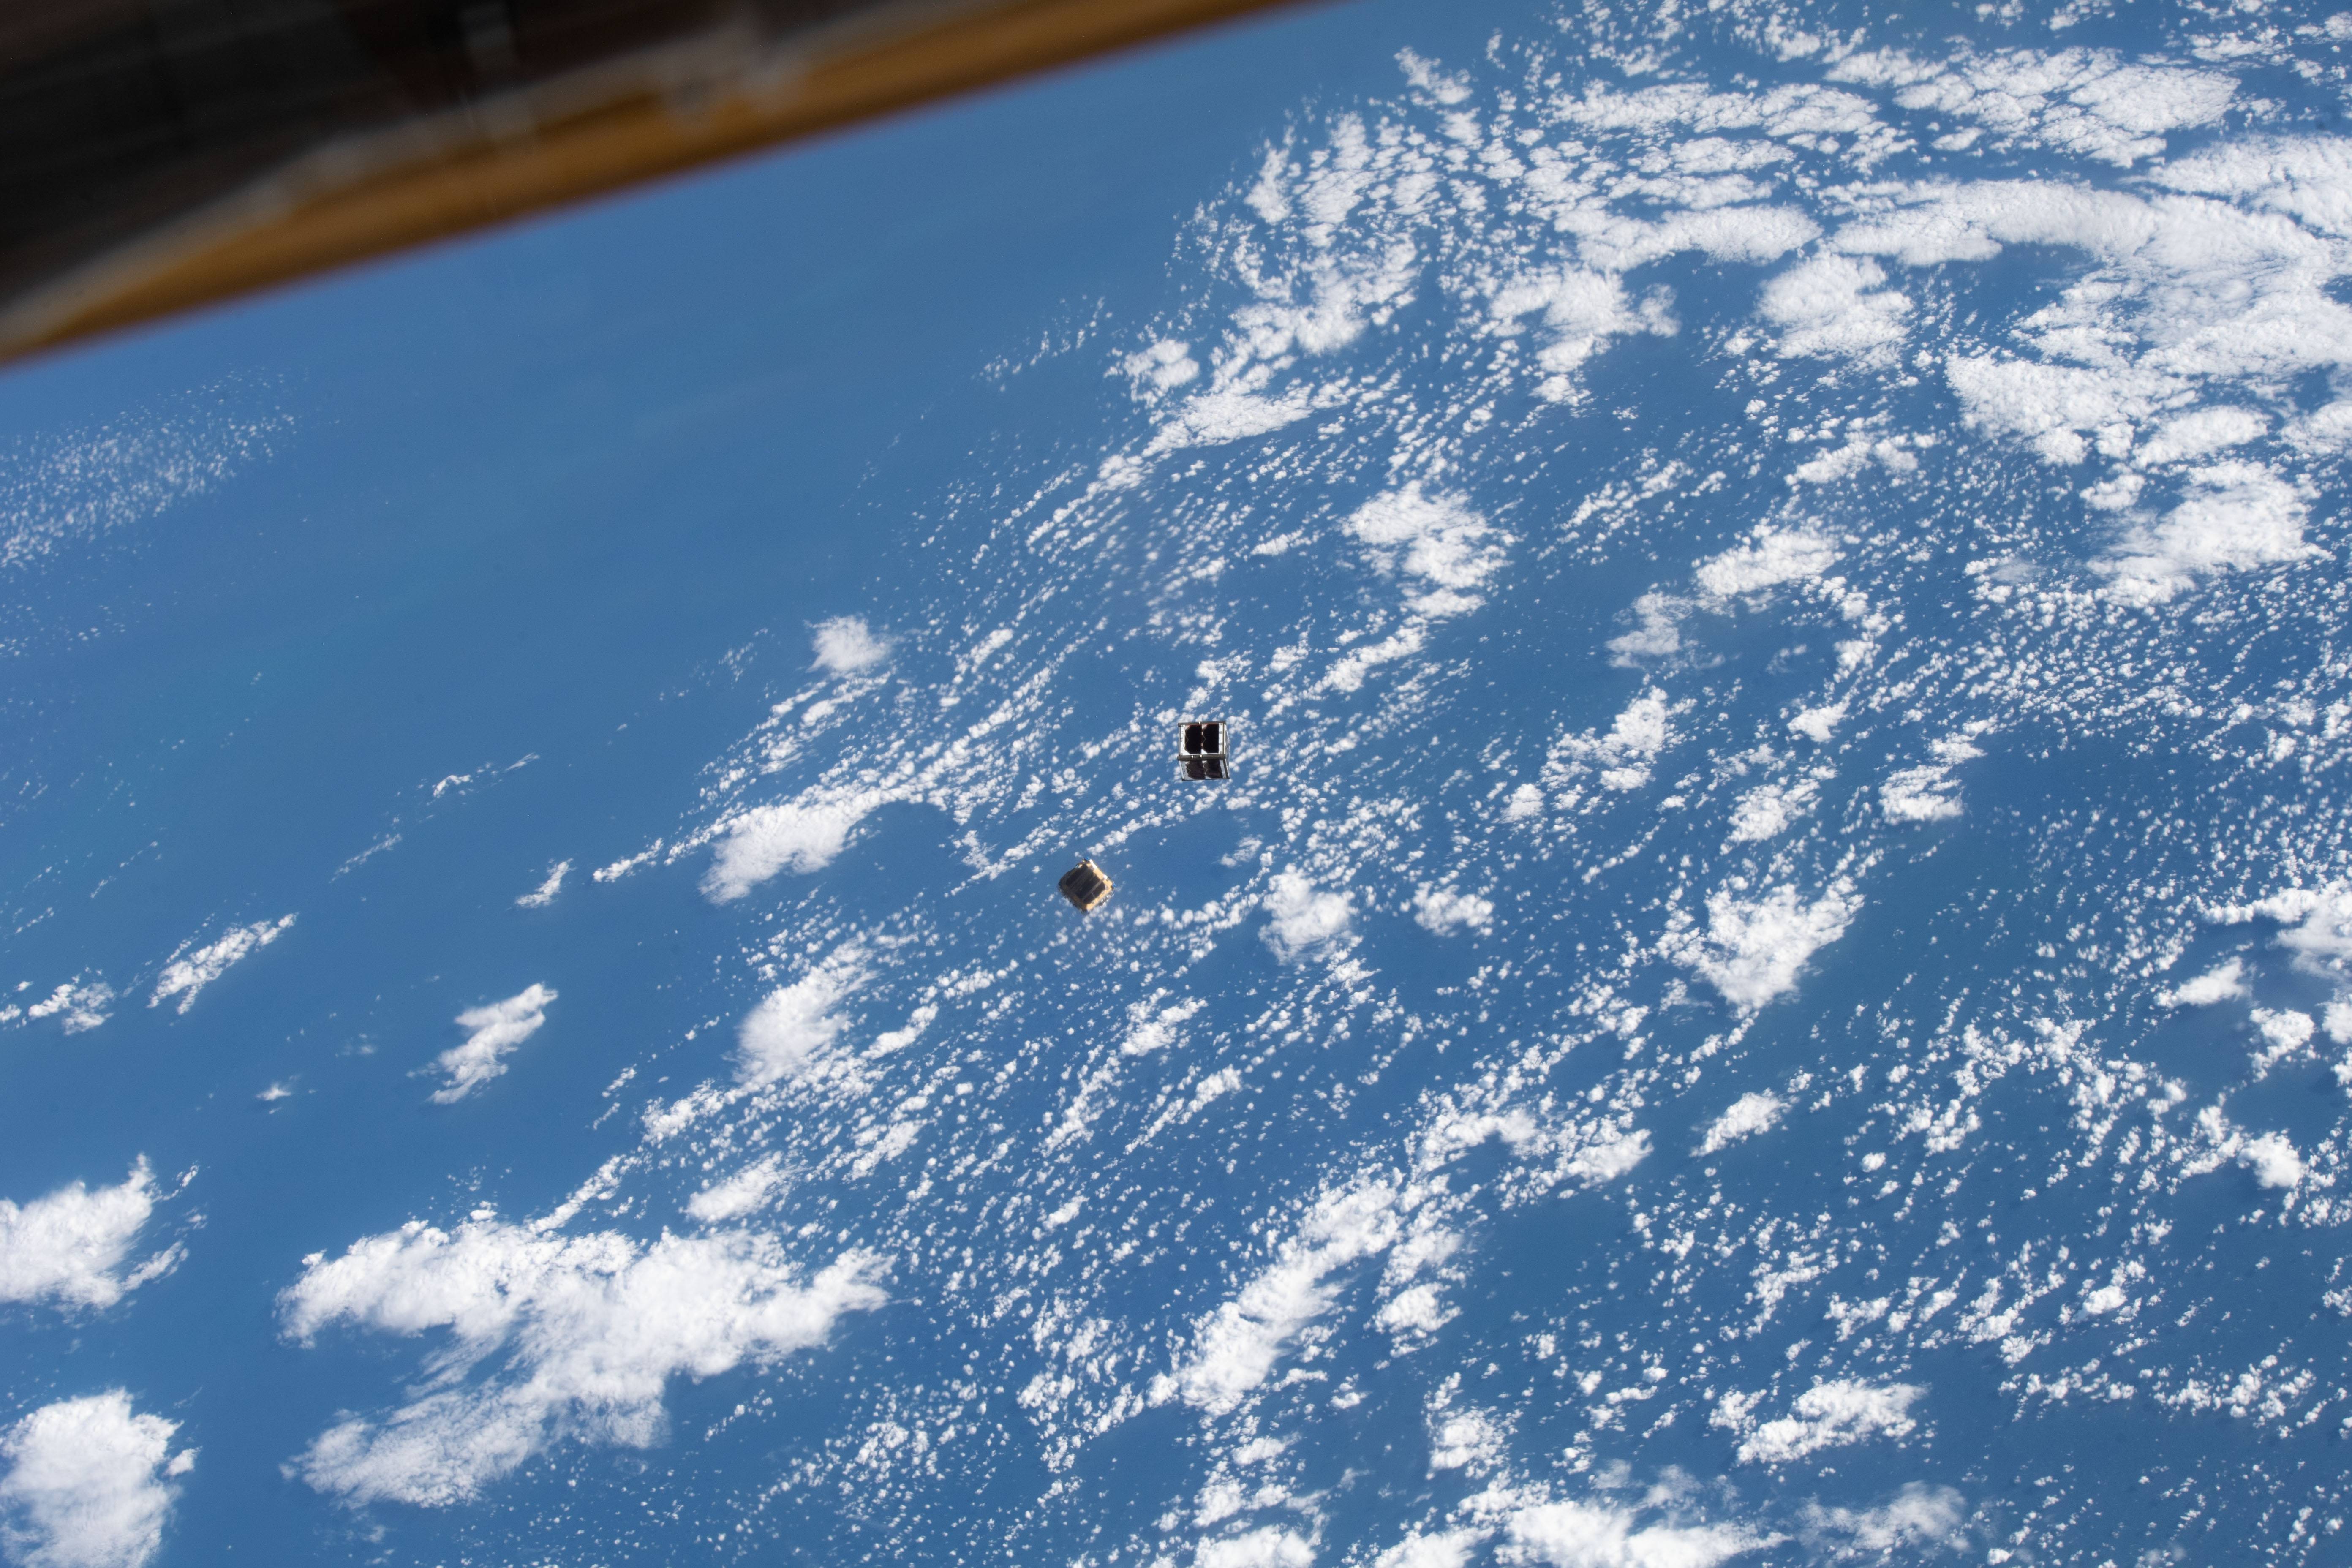 GASPACS is deployed from the ISS